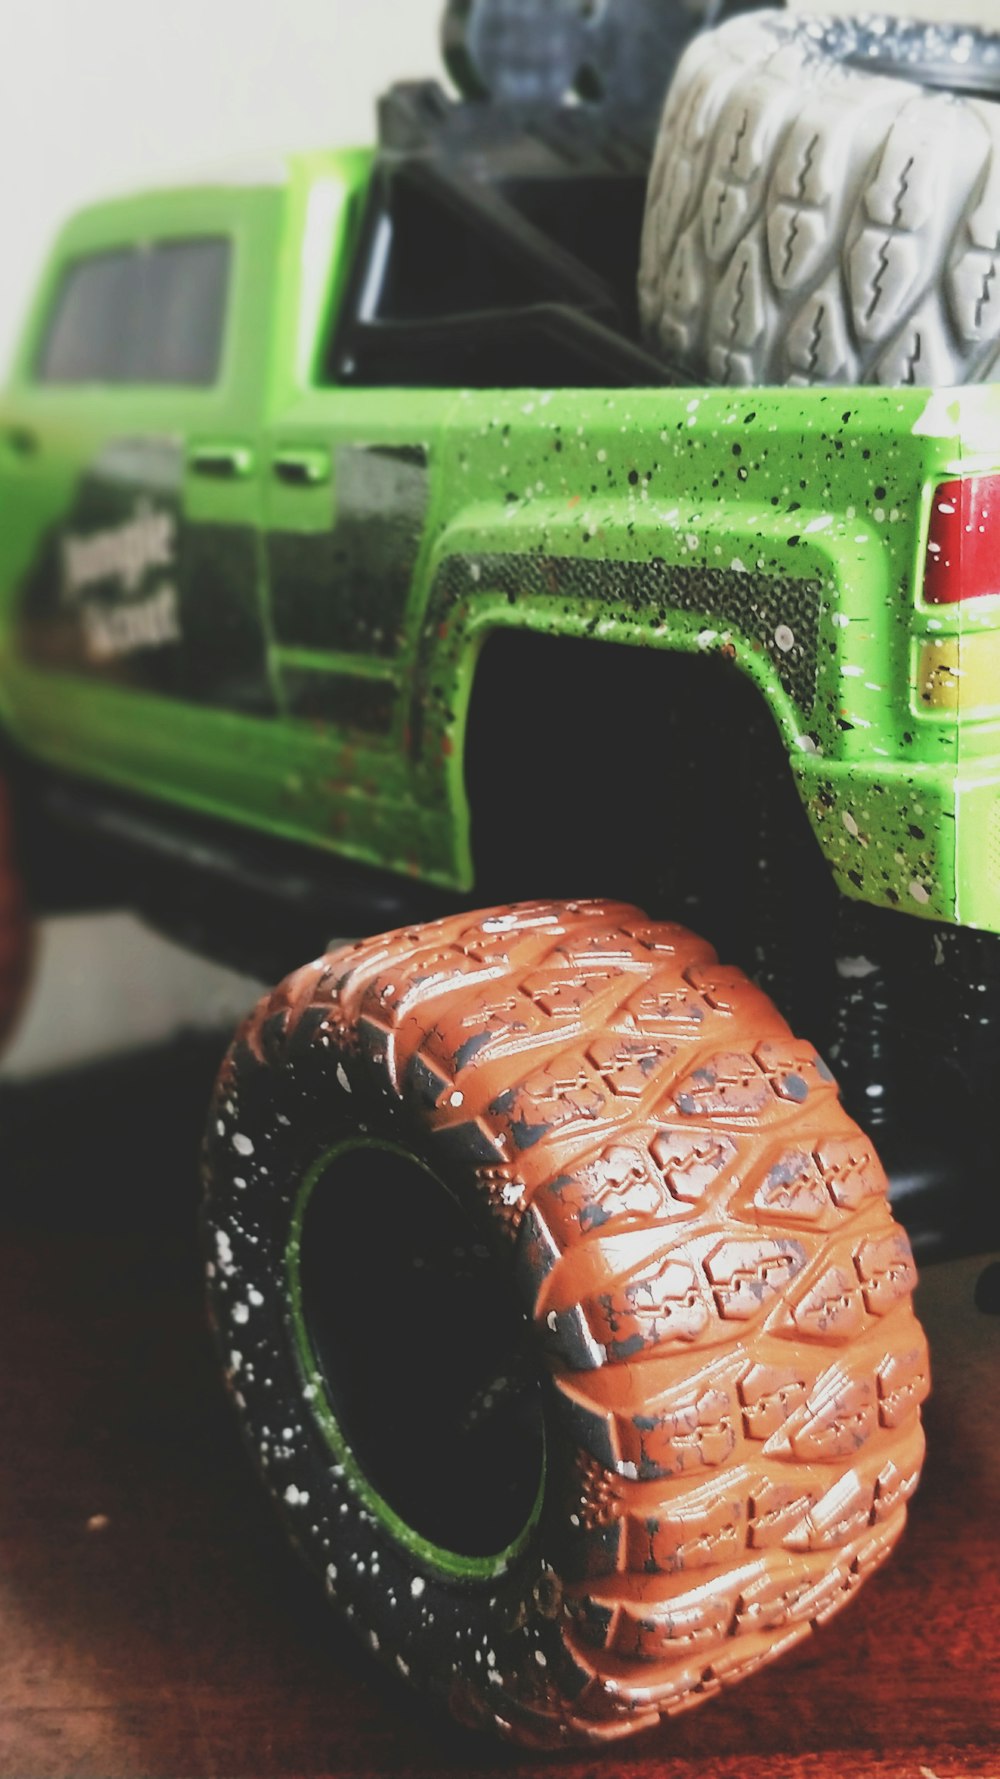 Large dirty tires on a green toy truck.